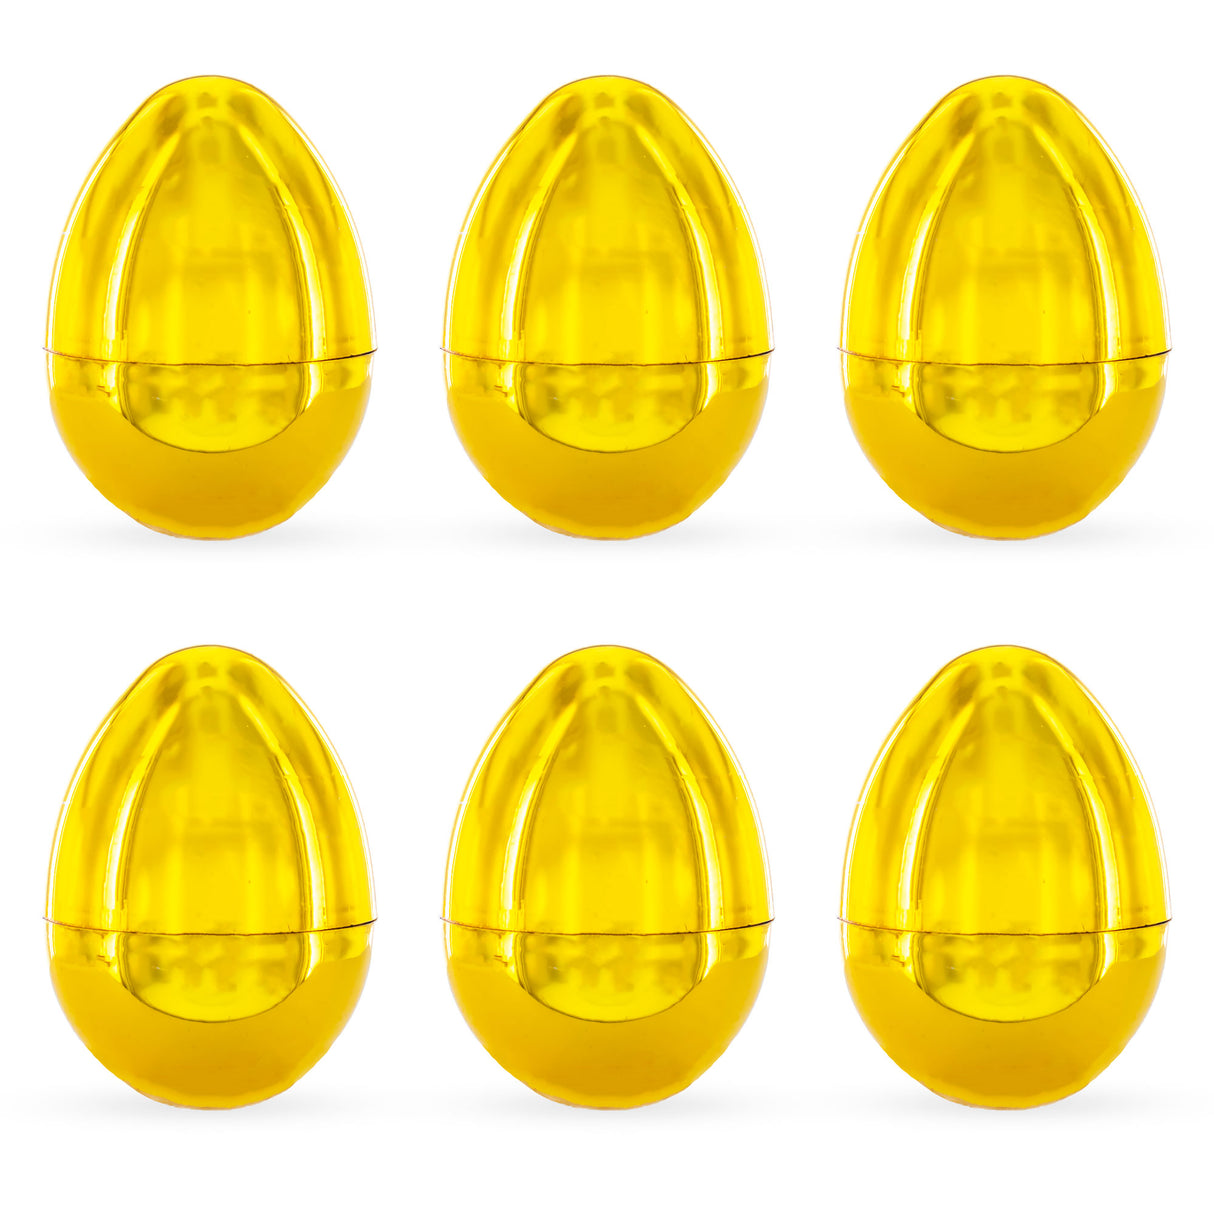 Plastic Set of 6 Shiny Gold-Tone Easter Eggs 2.25 Inches in Gold color Oval